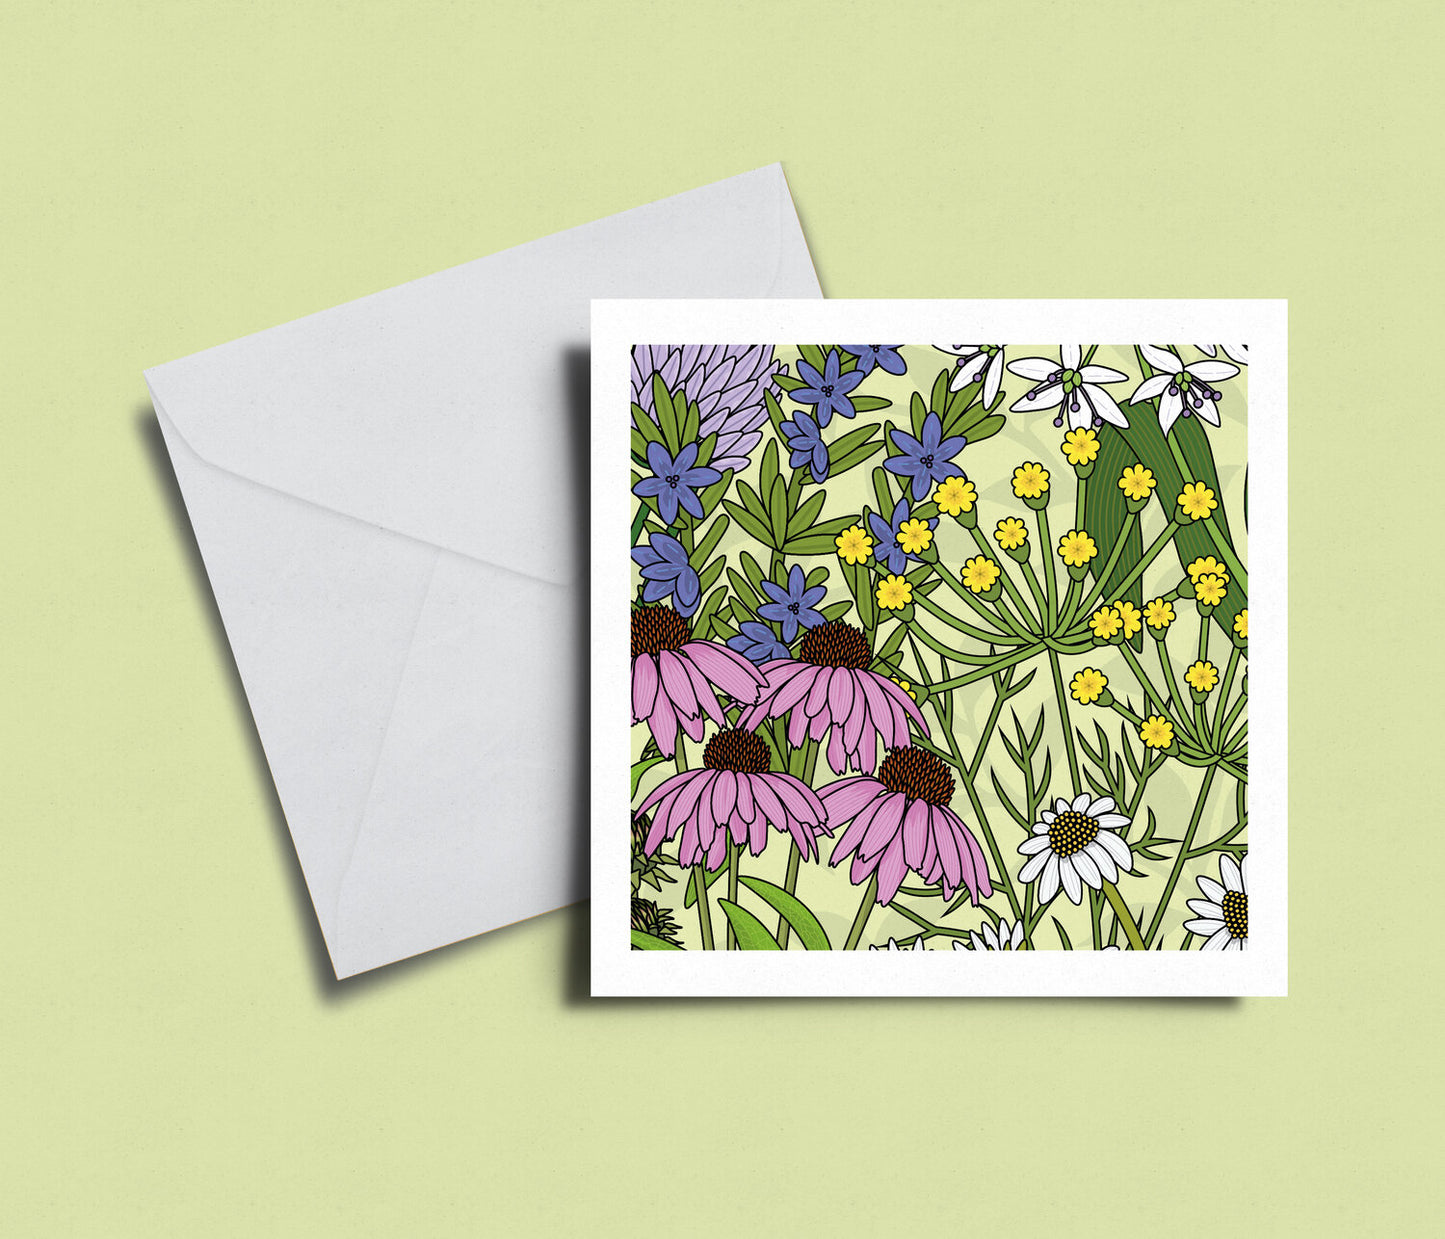 A card adorned with a digitally designed illustration of beautiful flowers, blank inside, 14 cm x 14cm.